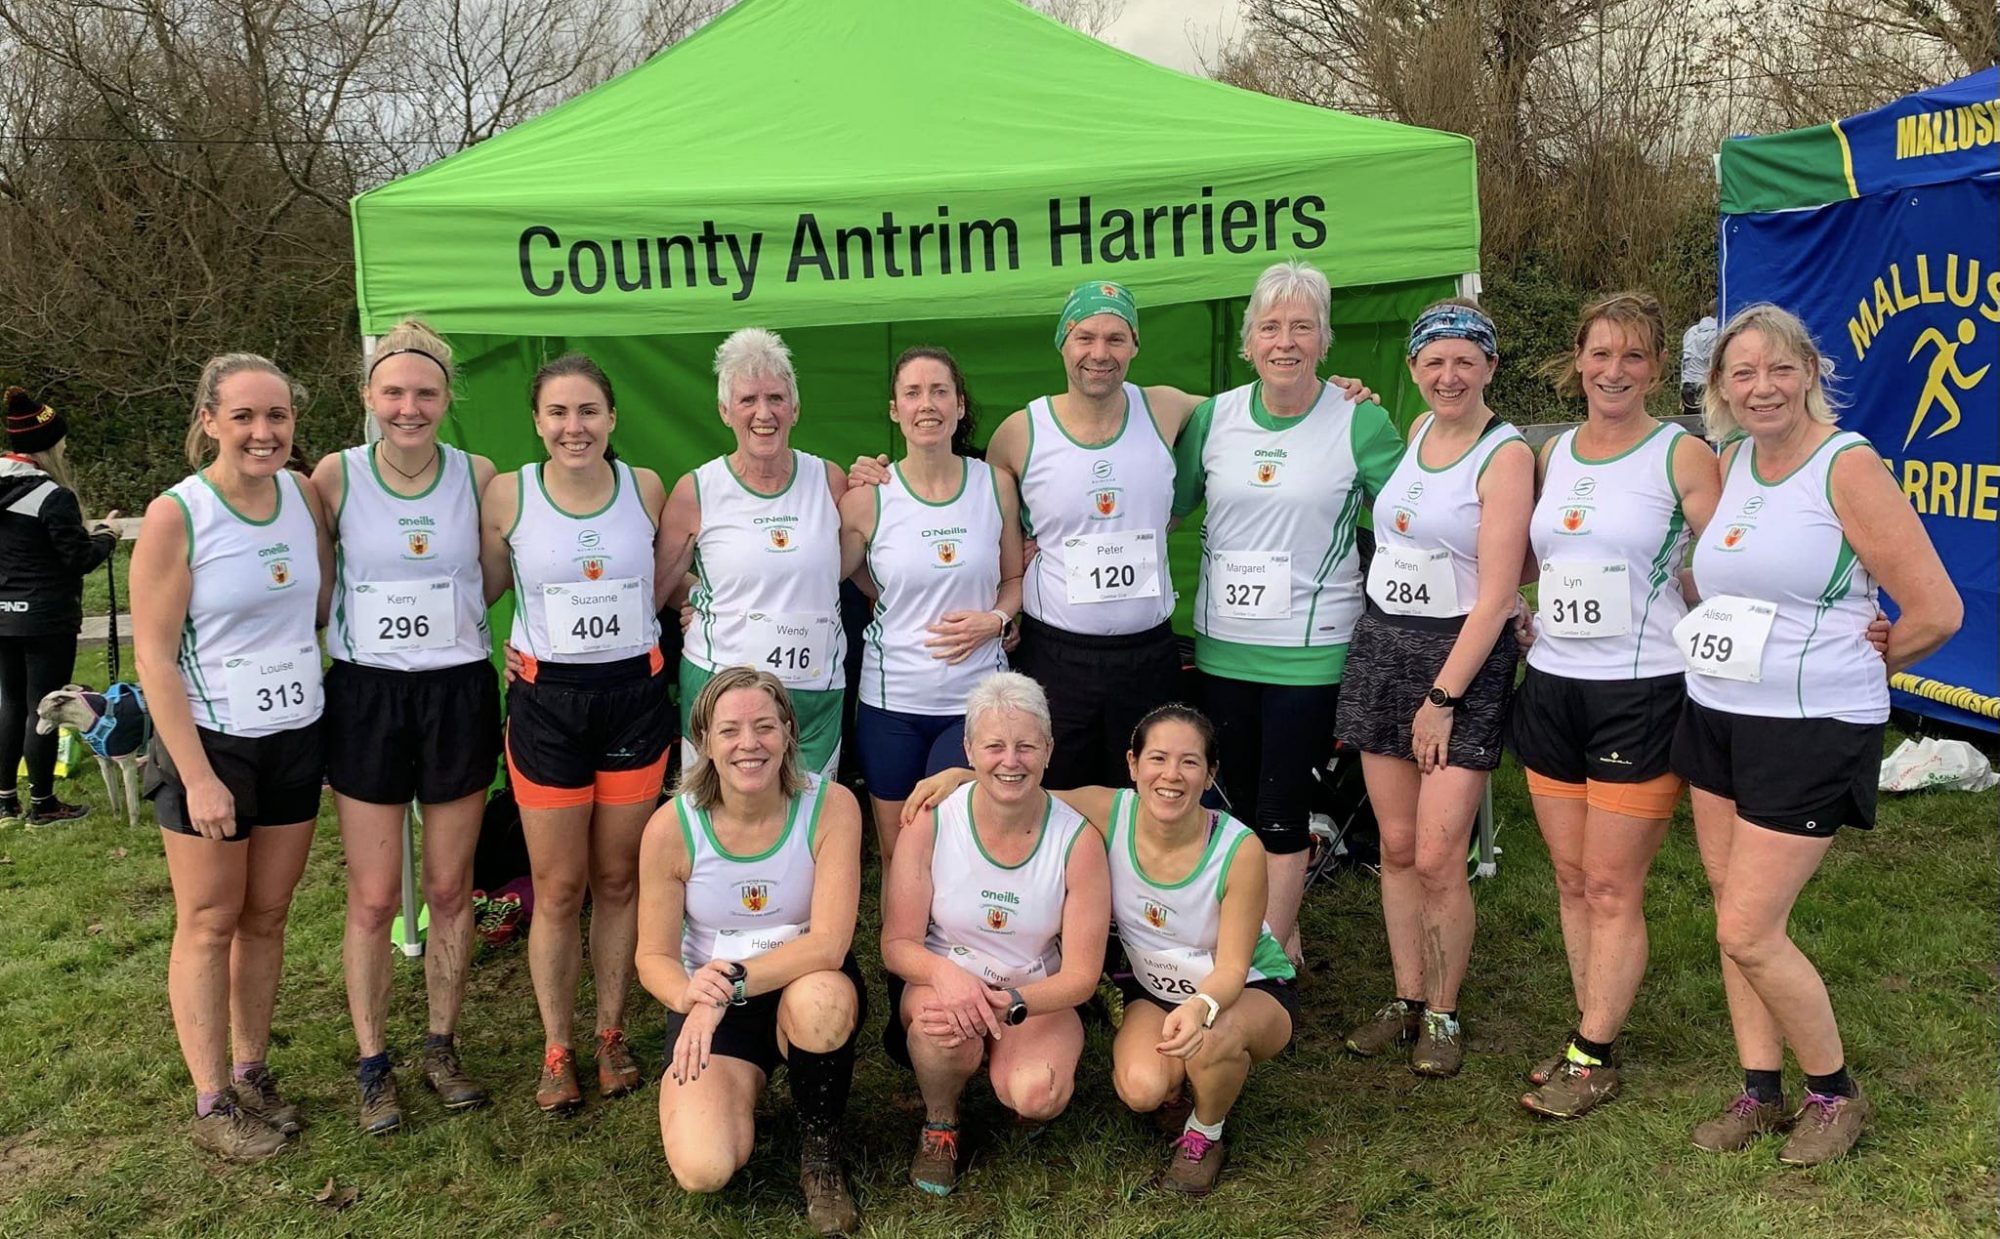 County Antrim Harriers